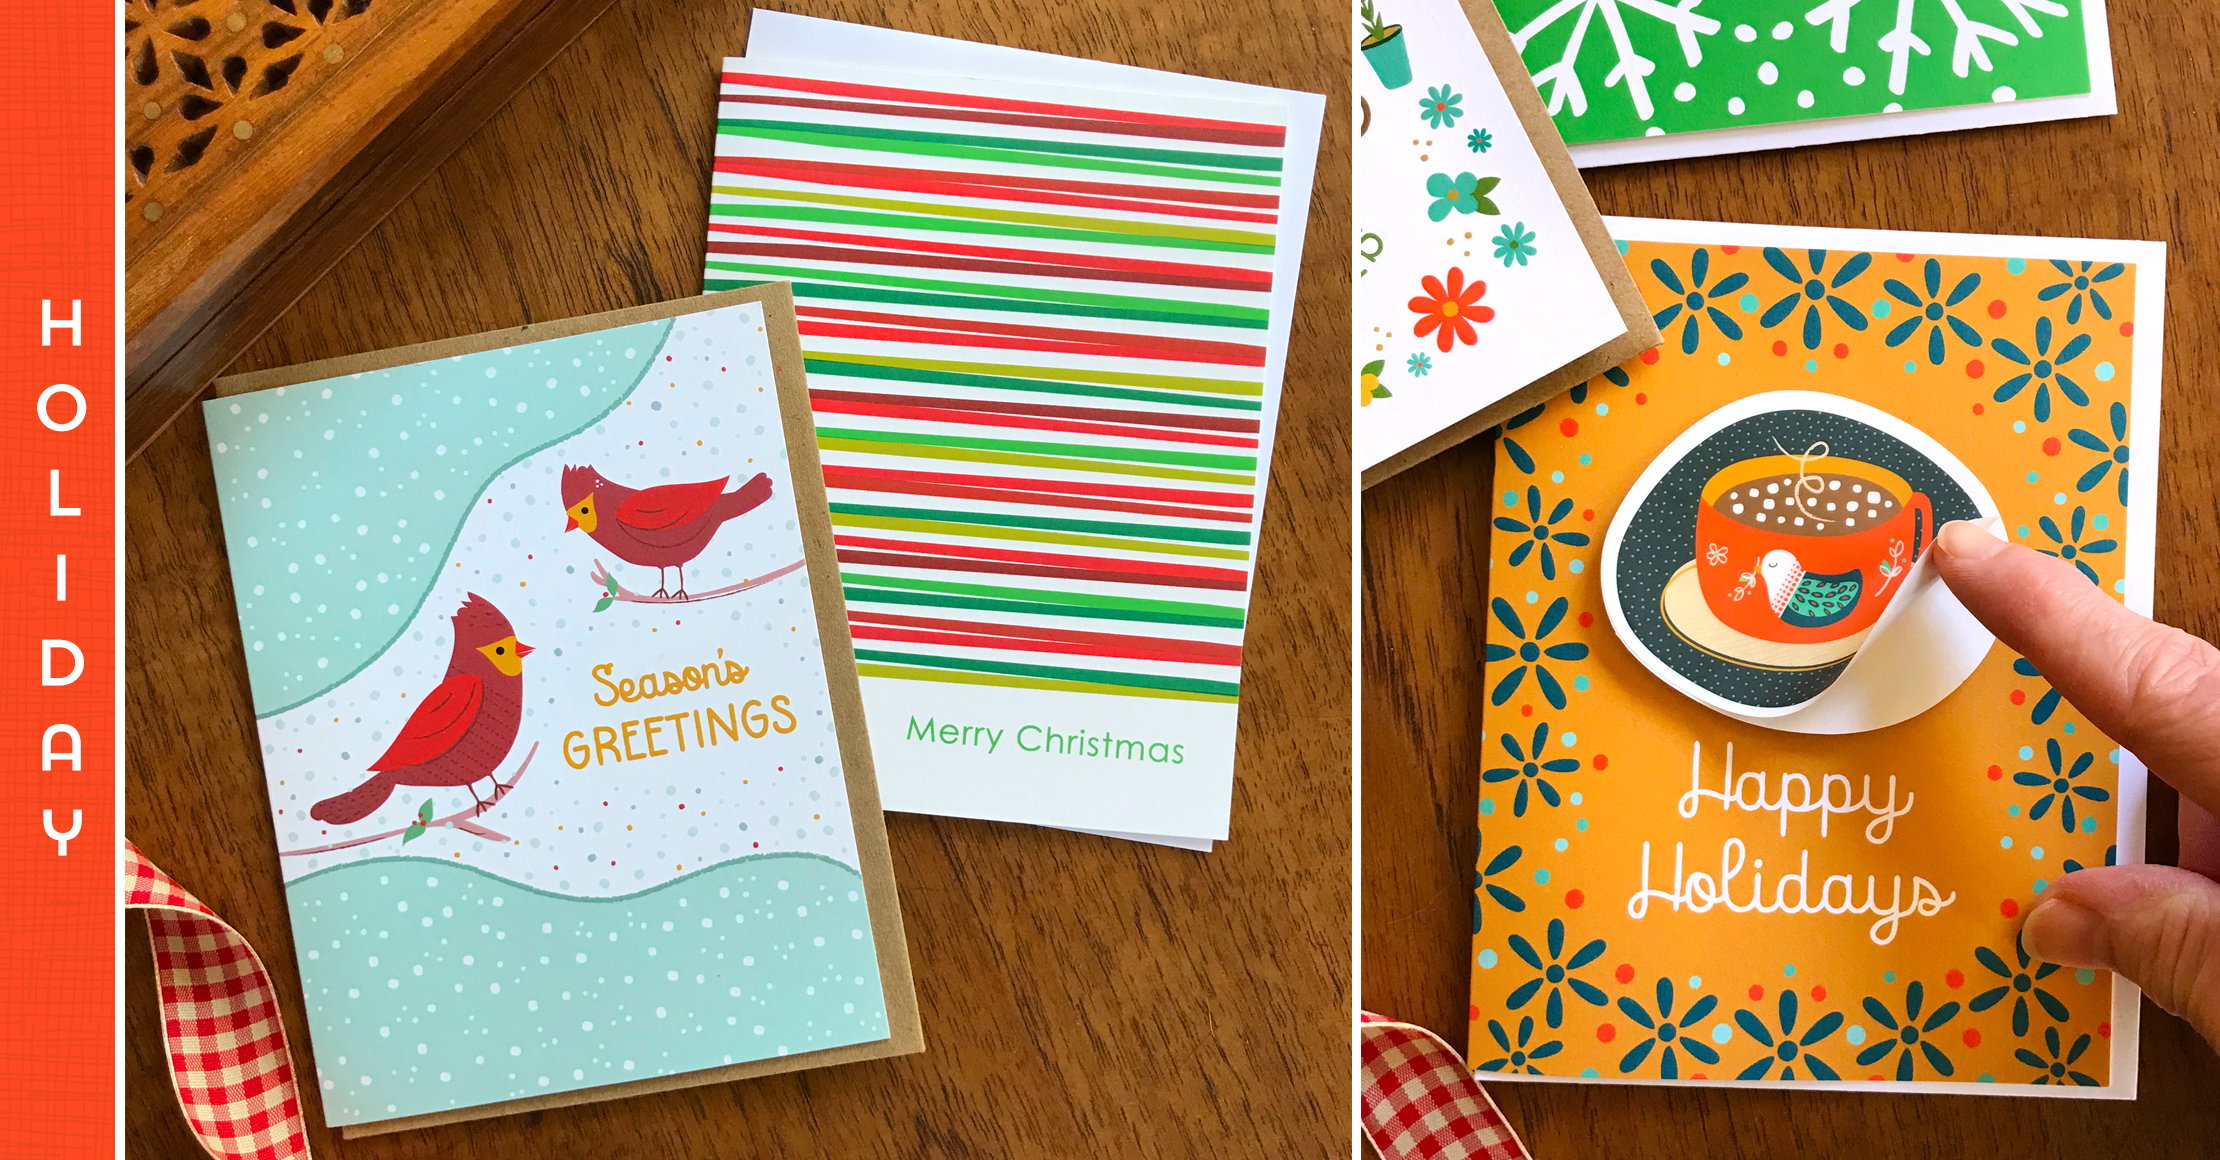 Meowy Christmas Holiday Cards & Enamel Pin Set by Night Owl Paper Goods